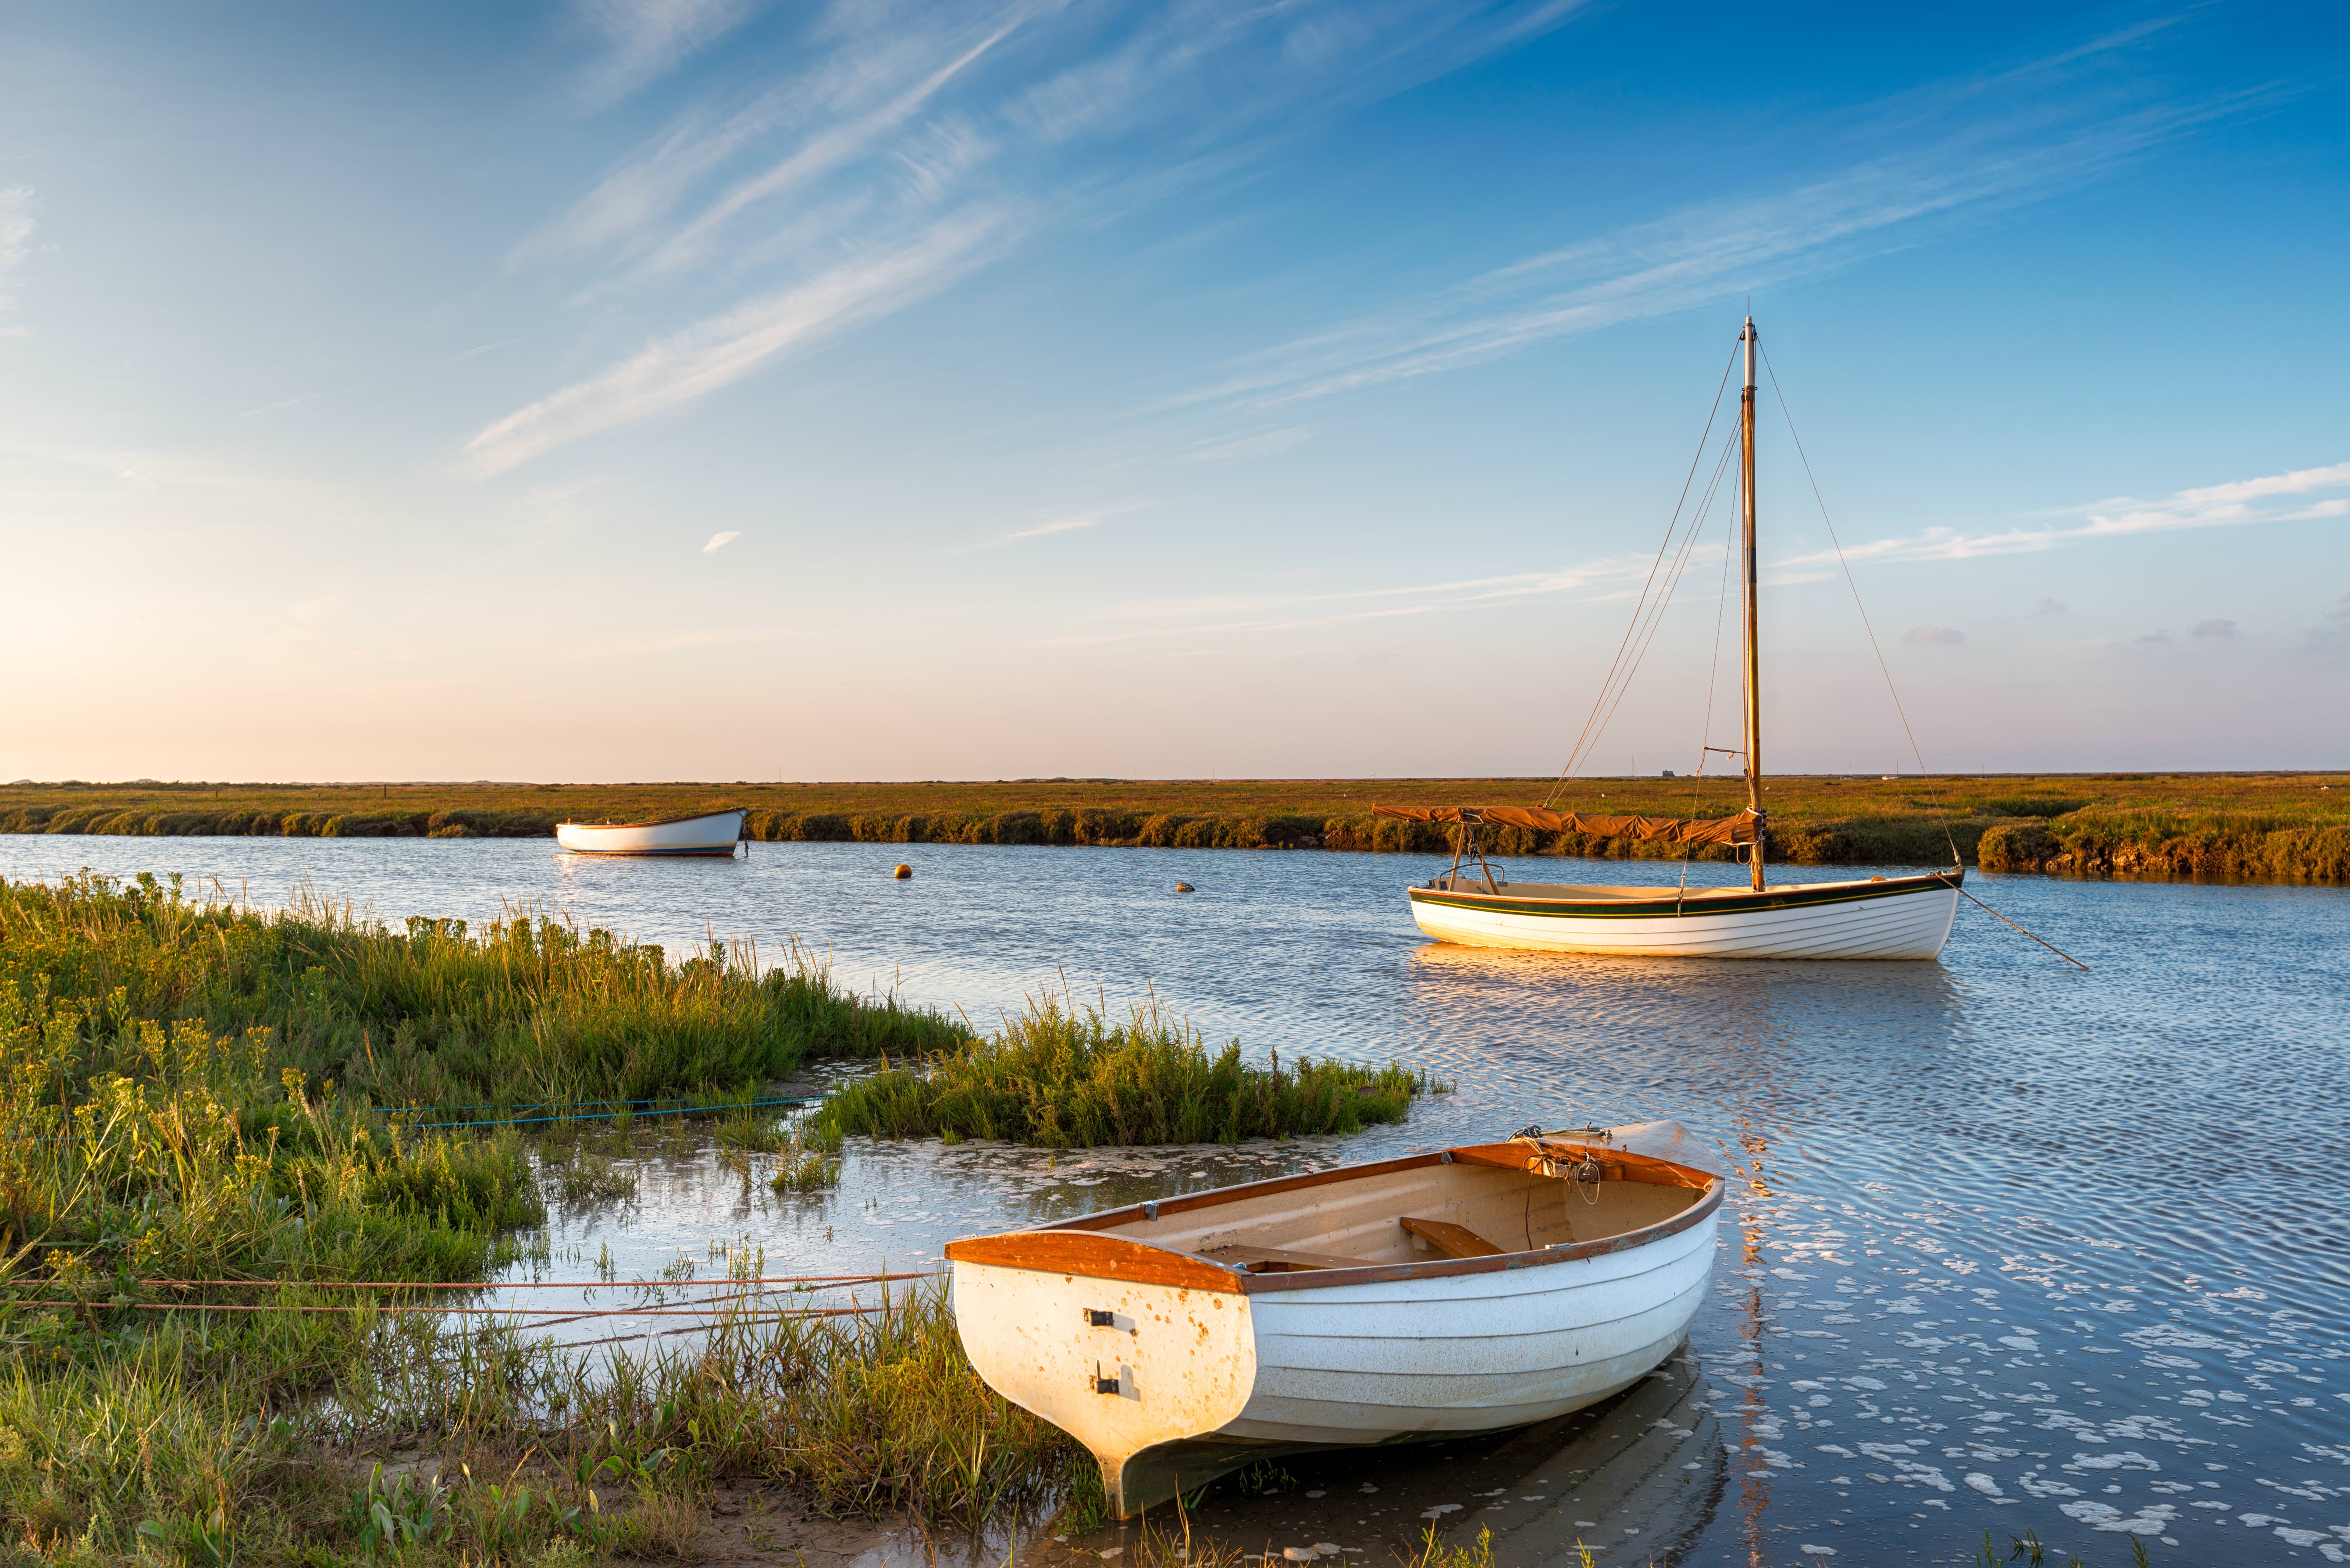 The Norfolk coast was named the best southern and eastern England road trip